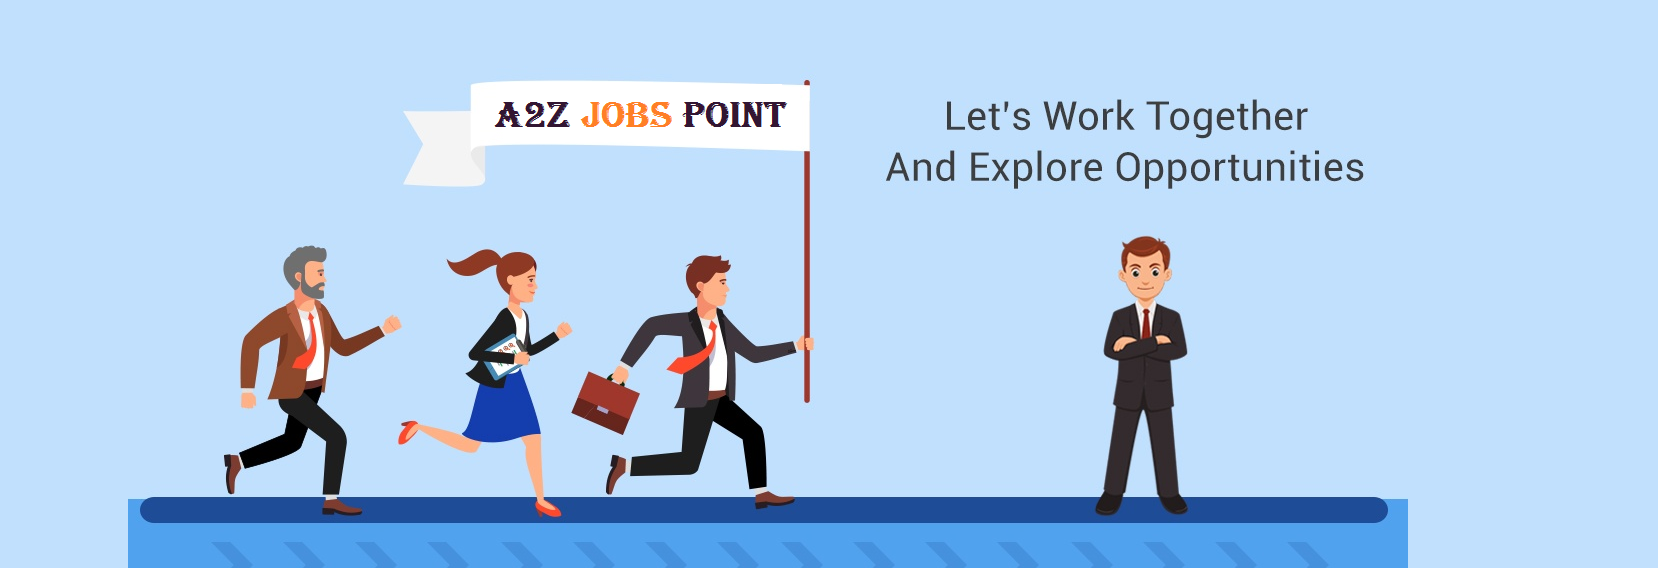 a2z banners jobs point